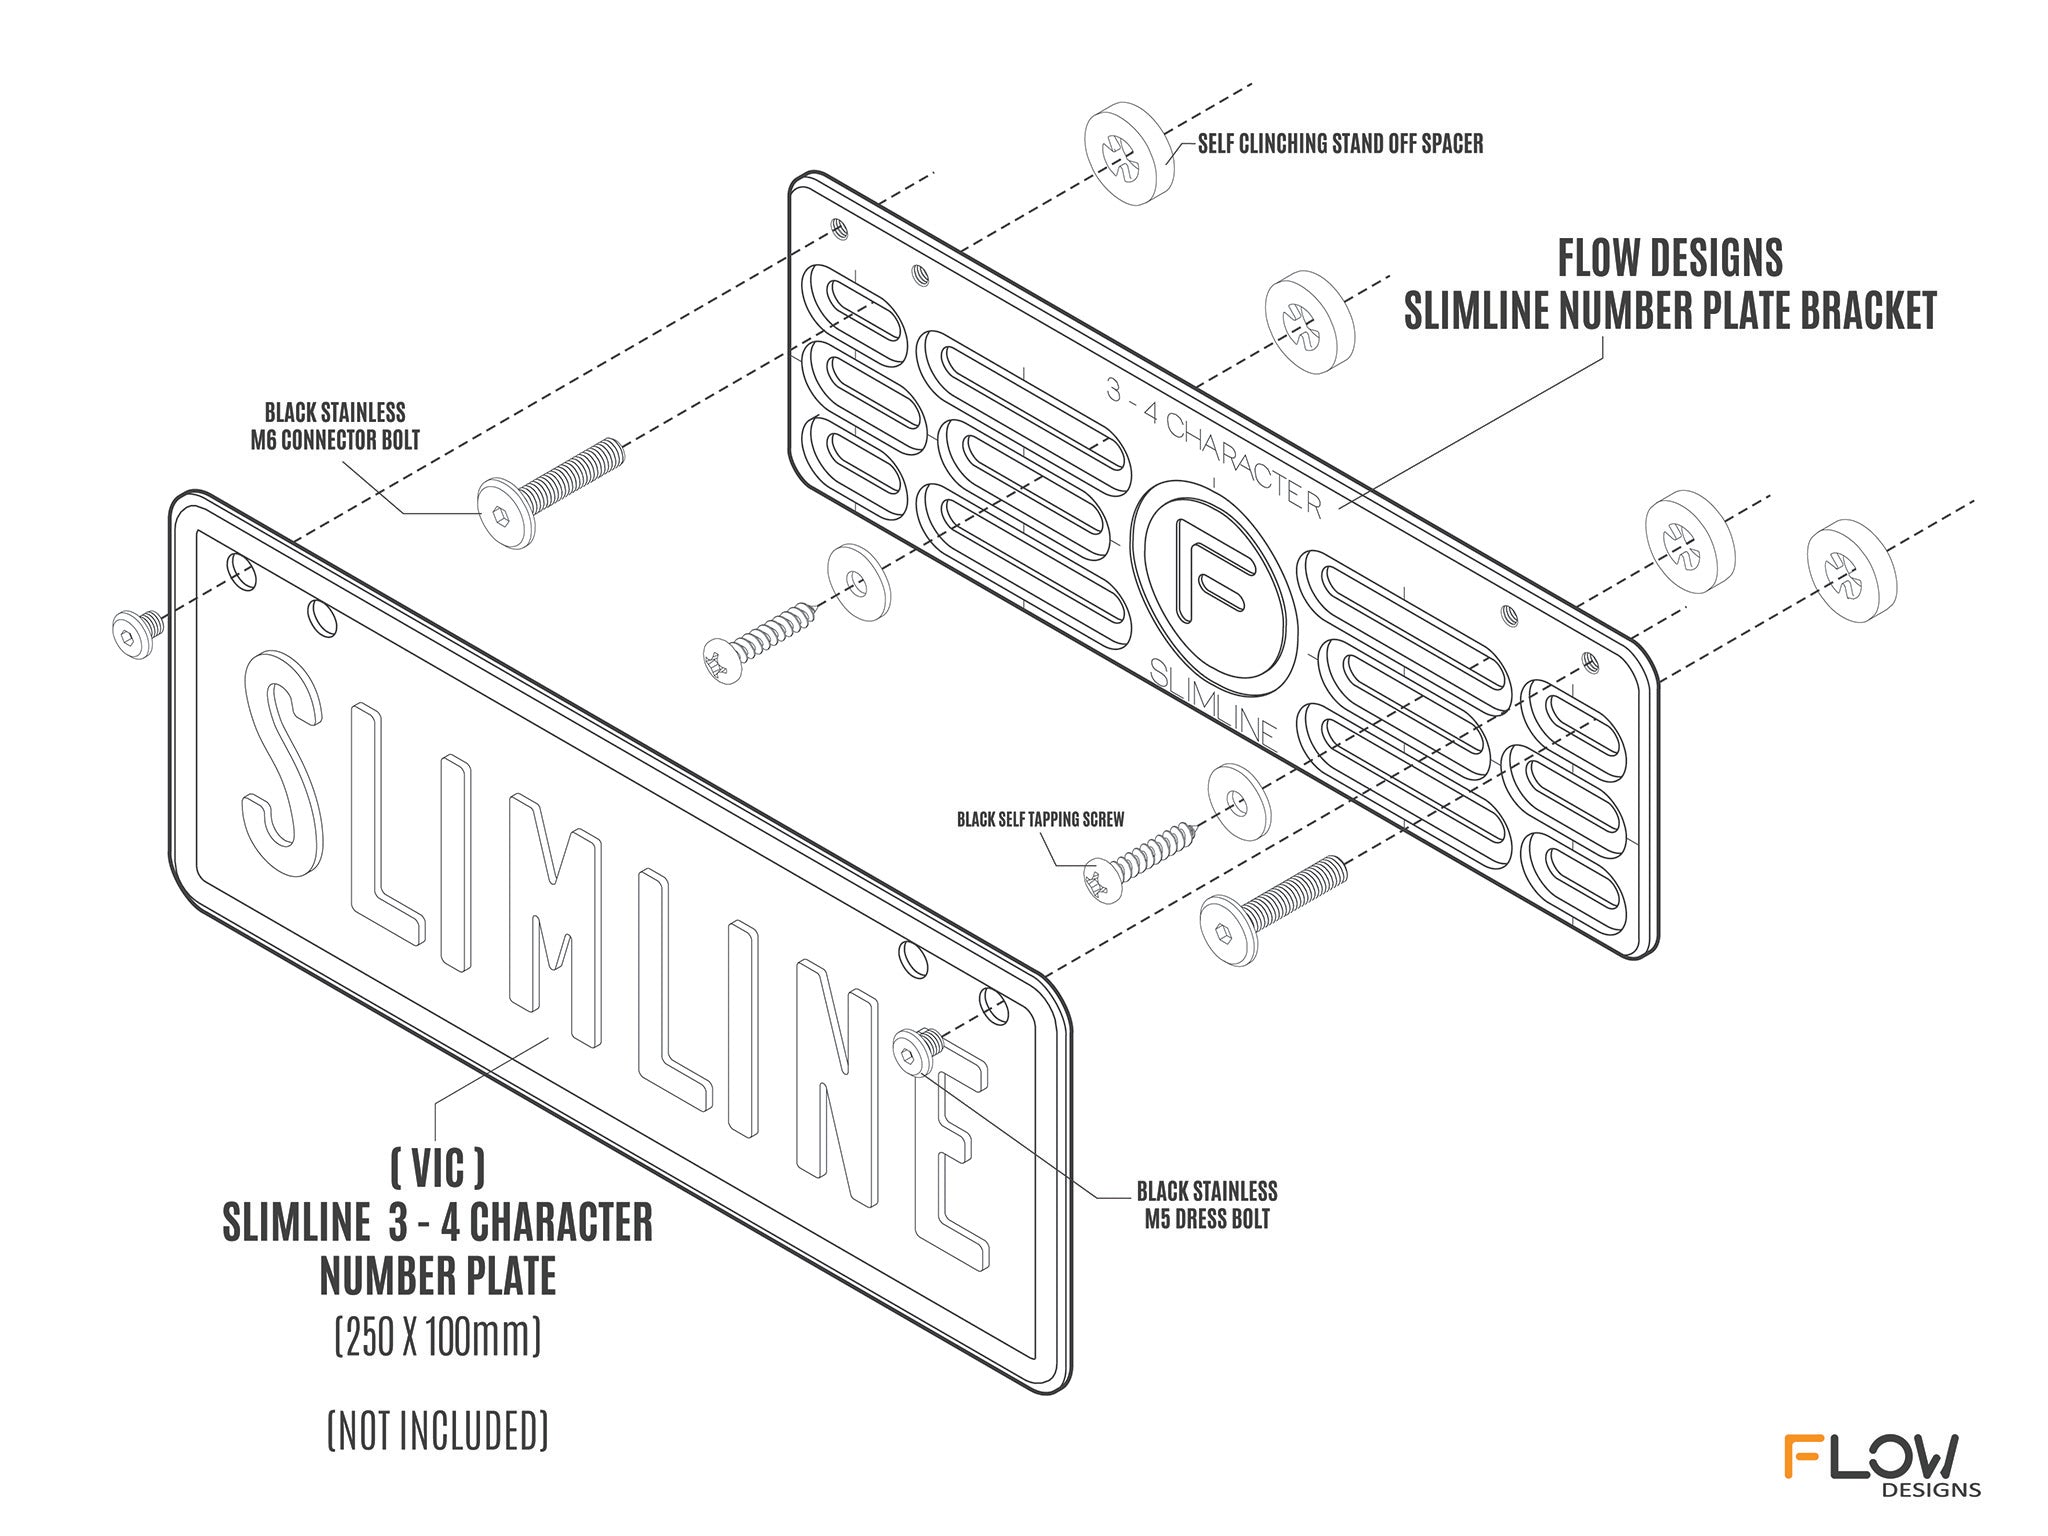 [VIC] Slimline 3-4 Character - Number Plate Bracket 250mm (h) x 100mm (w)